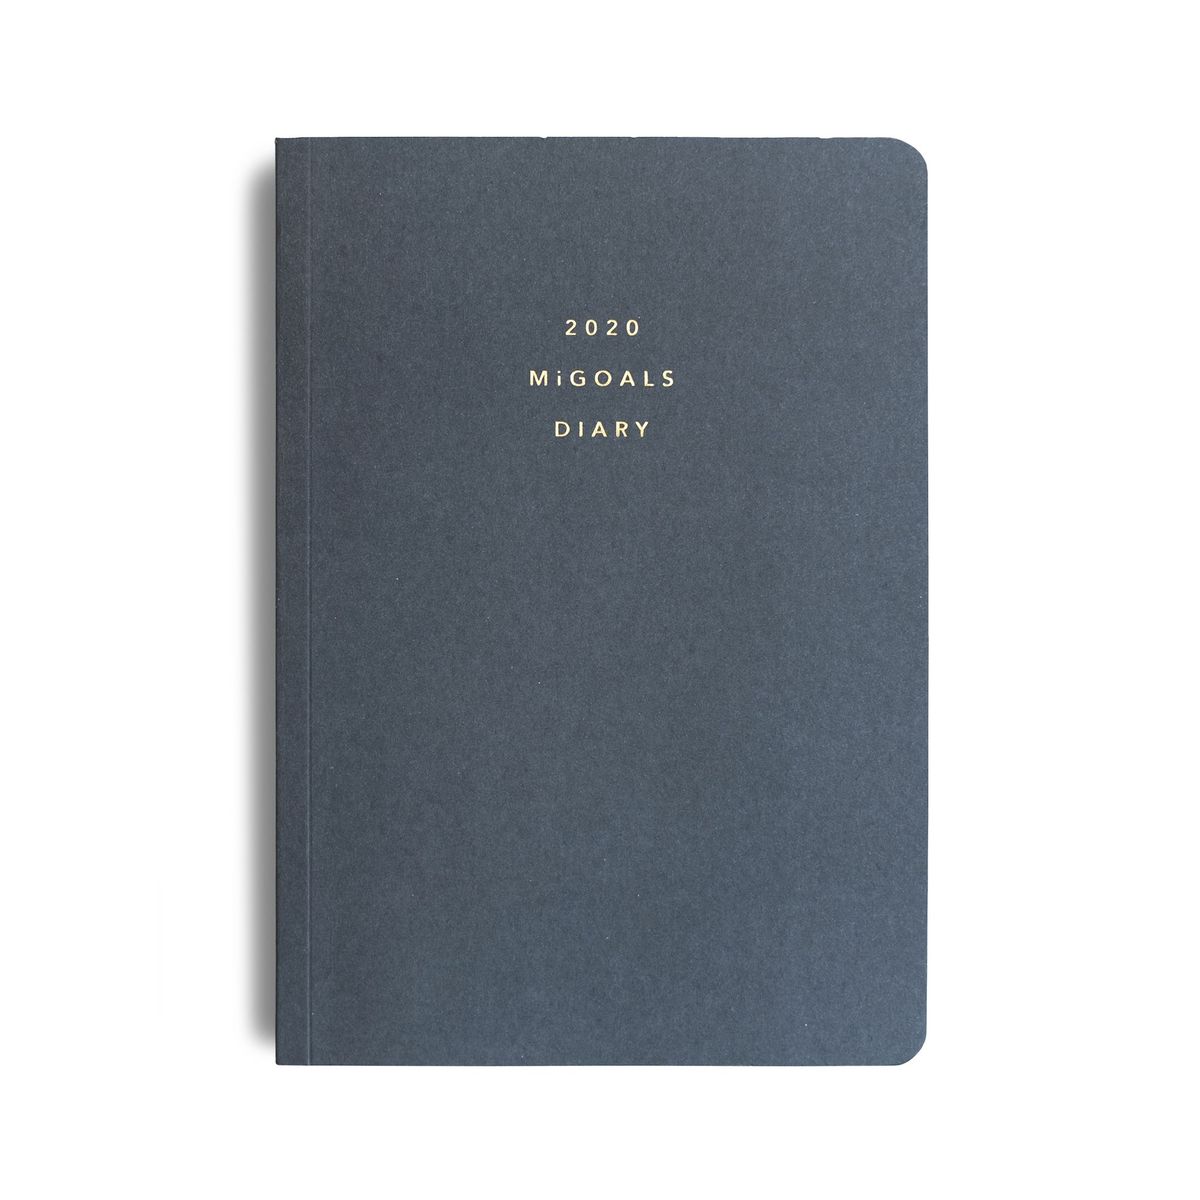 Migoals Paper Diary 2020 Navy A5